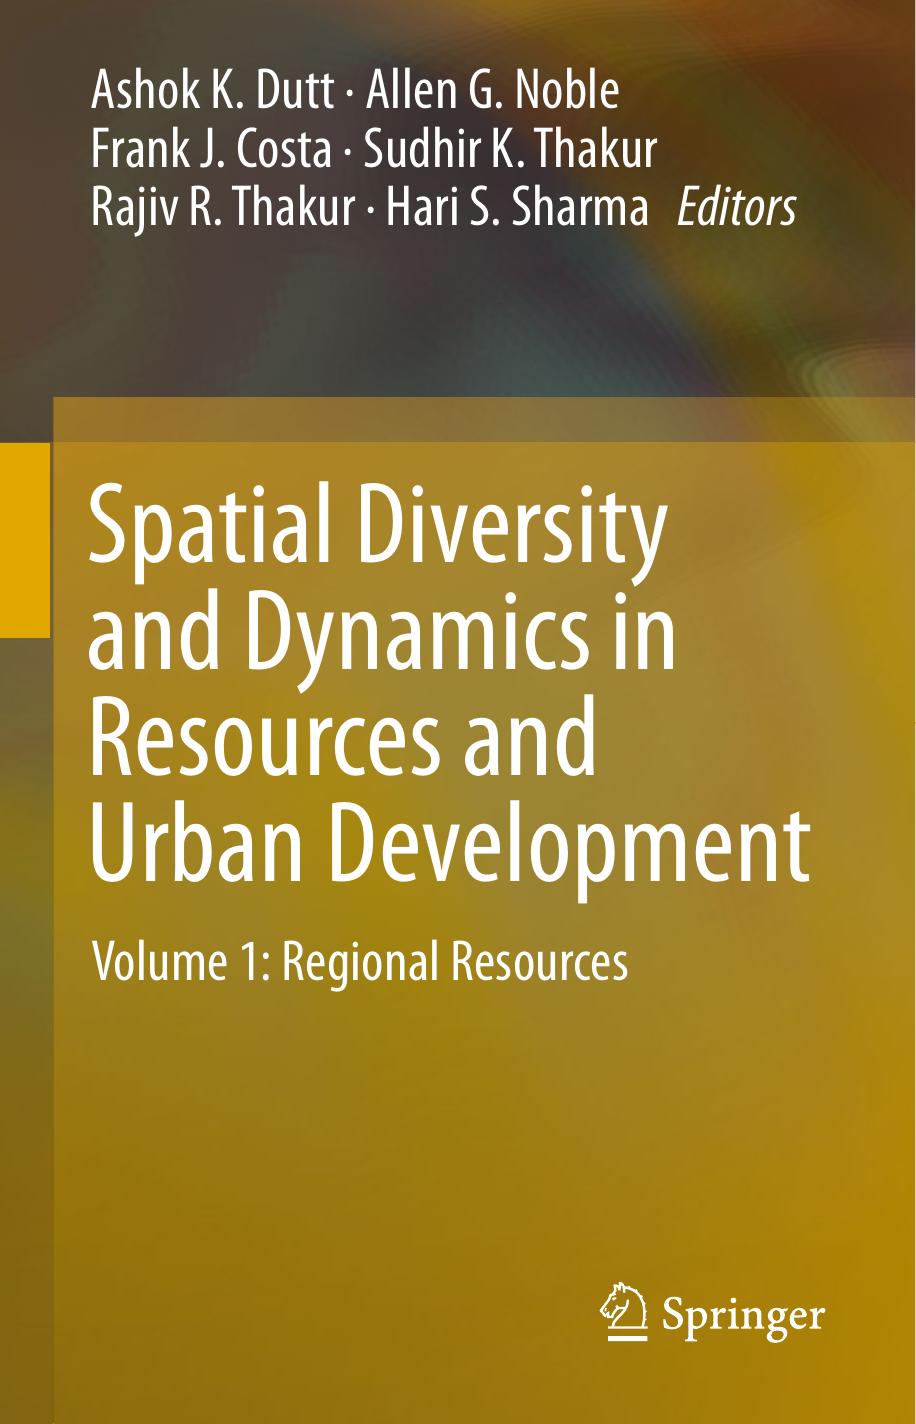 Spatial Diversity and Dynamics in Resources and Urban Development  Volume 1  Regional Resources 2010